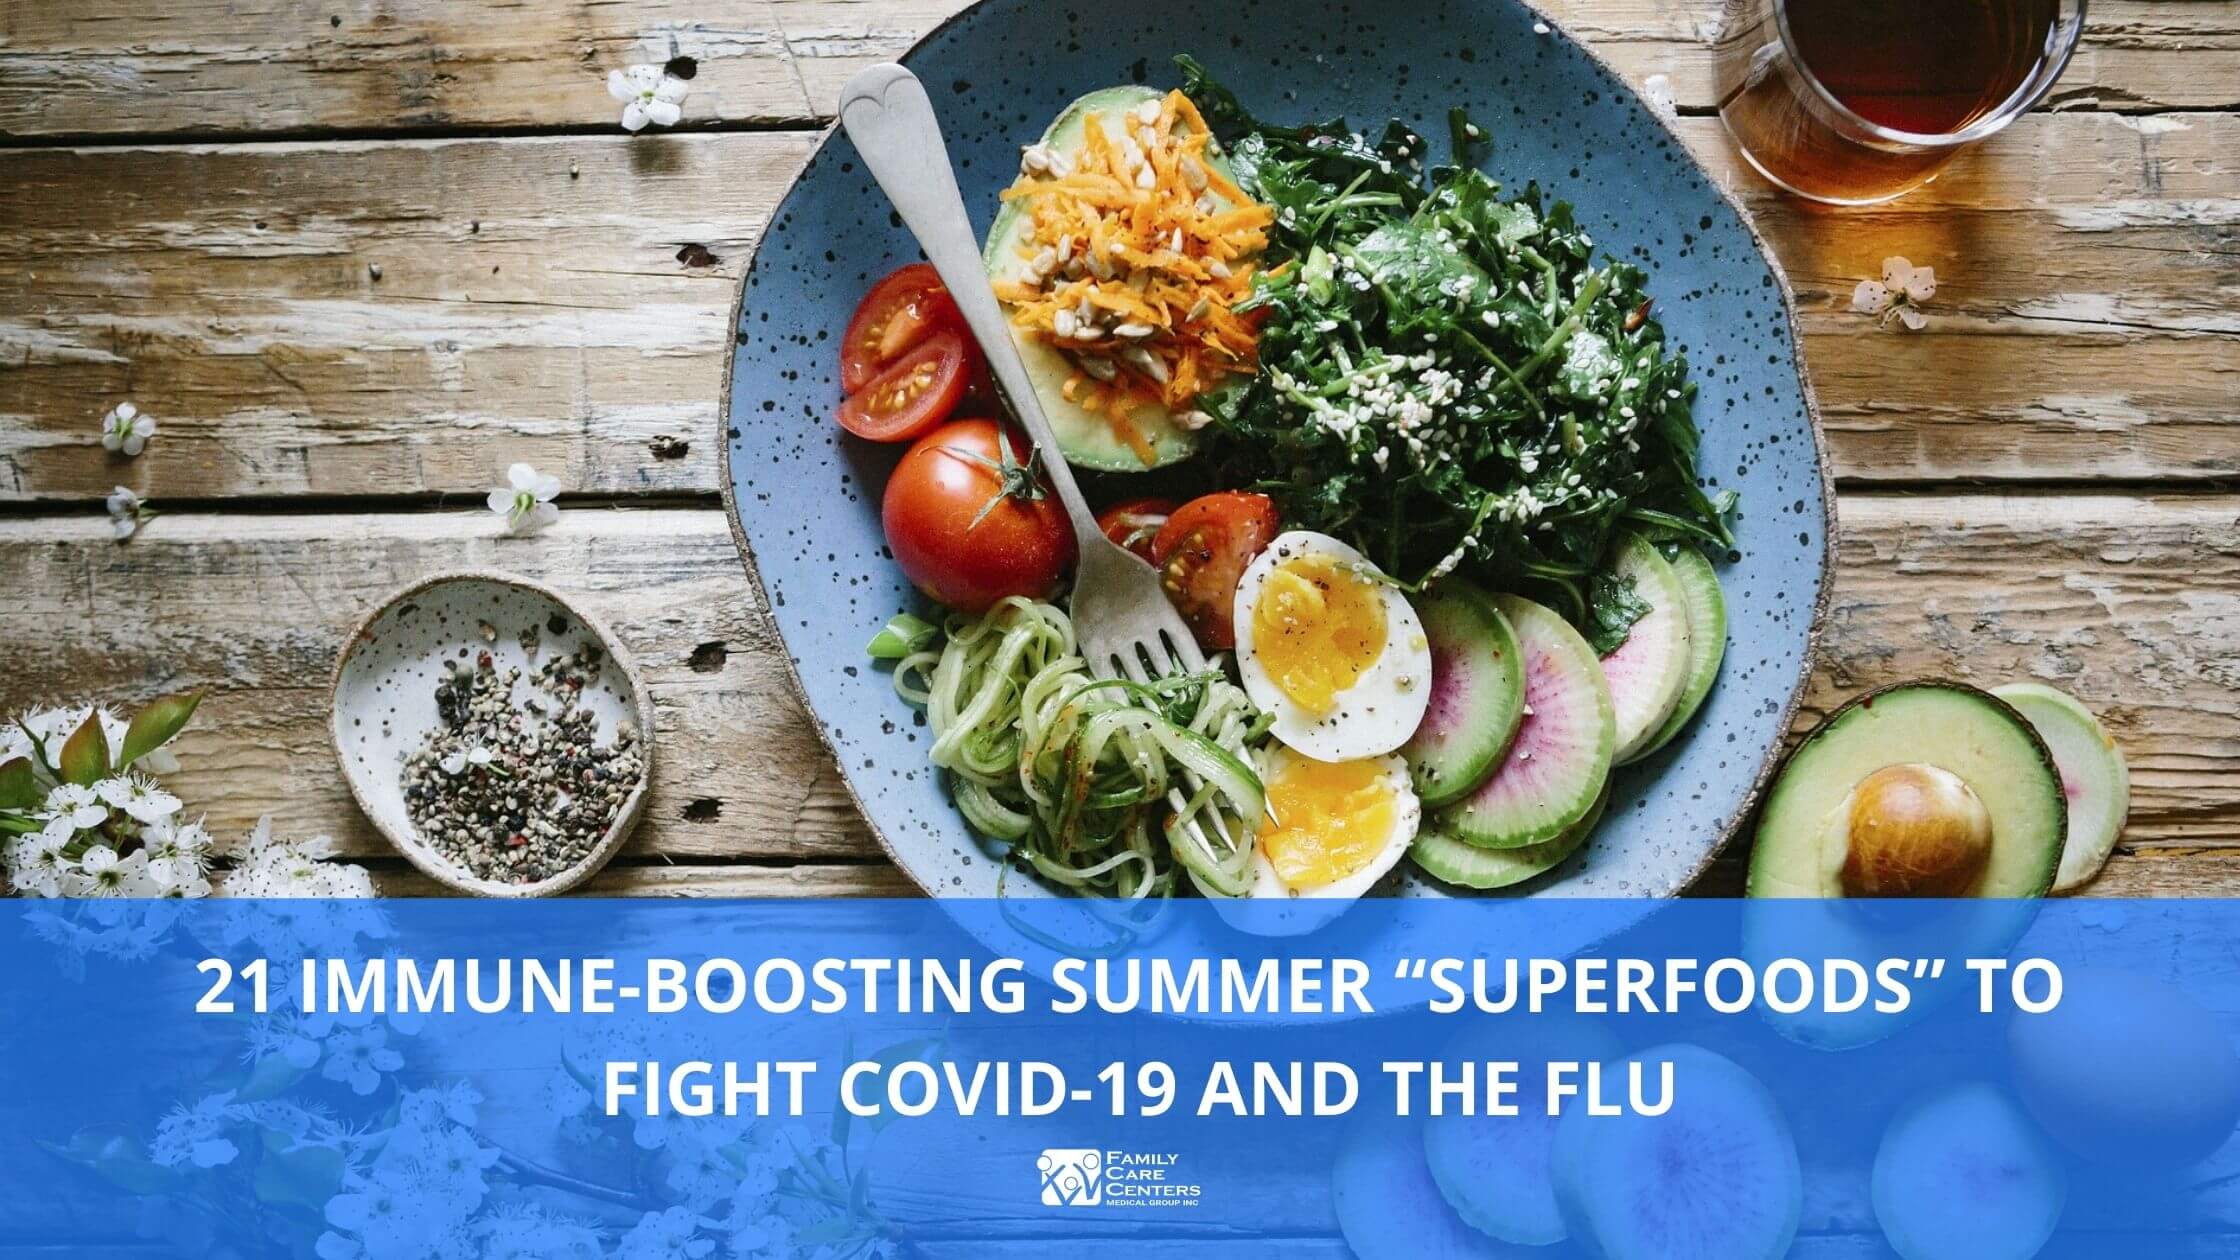 21 Immune-Boosting Summer “Superfoods” to Fight COVID-19 and the Flu